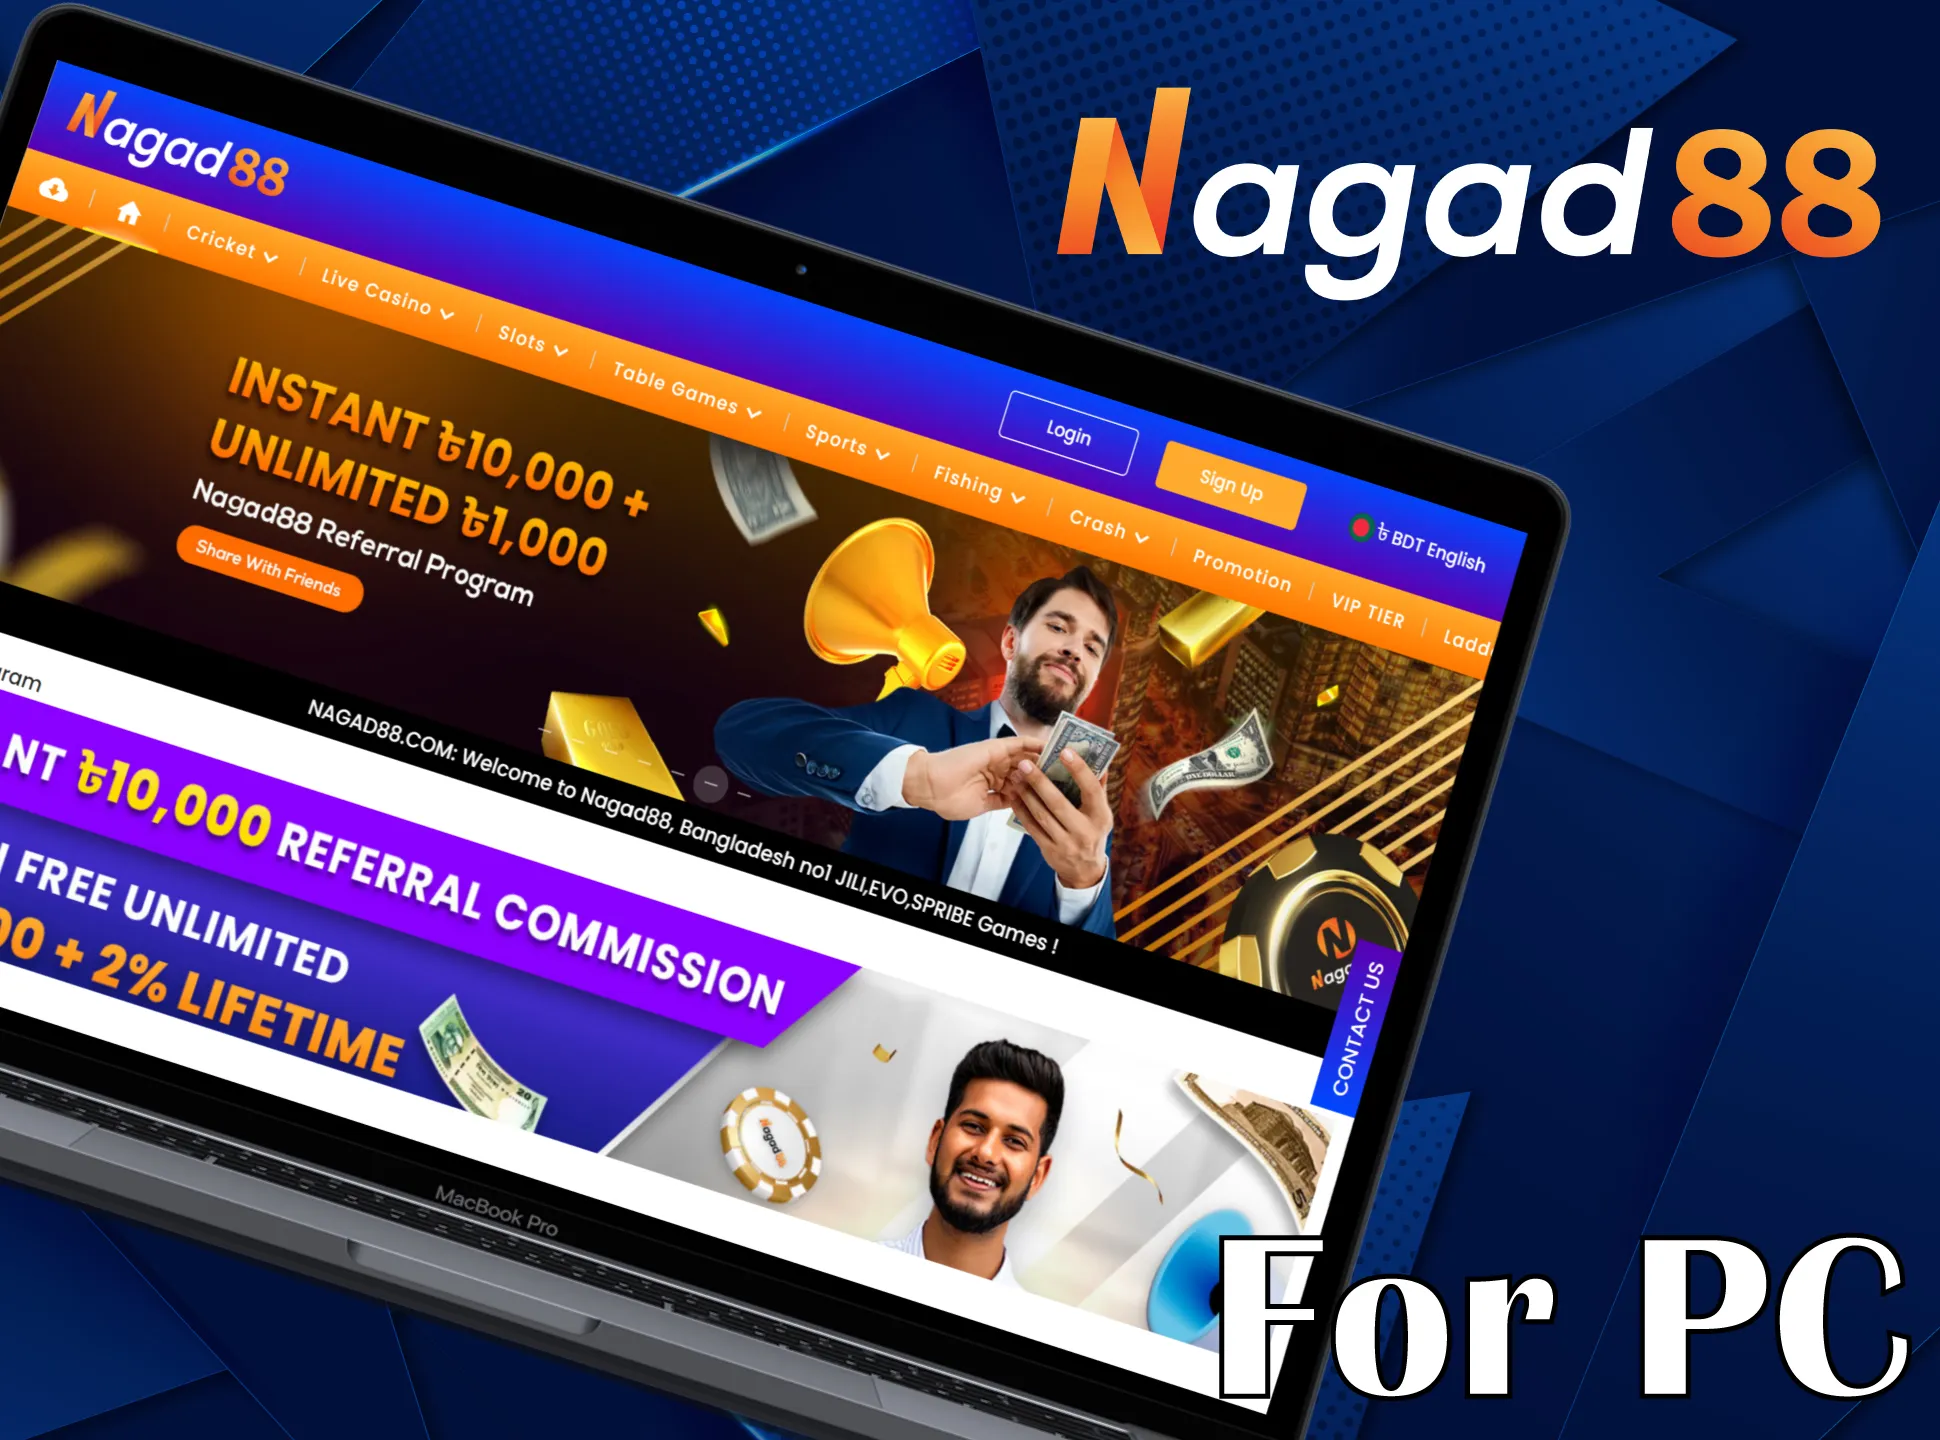 Make your bets and play at Nagad88 directly from your personal computer with the special application.